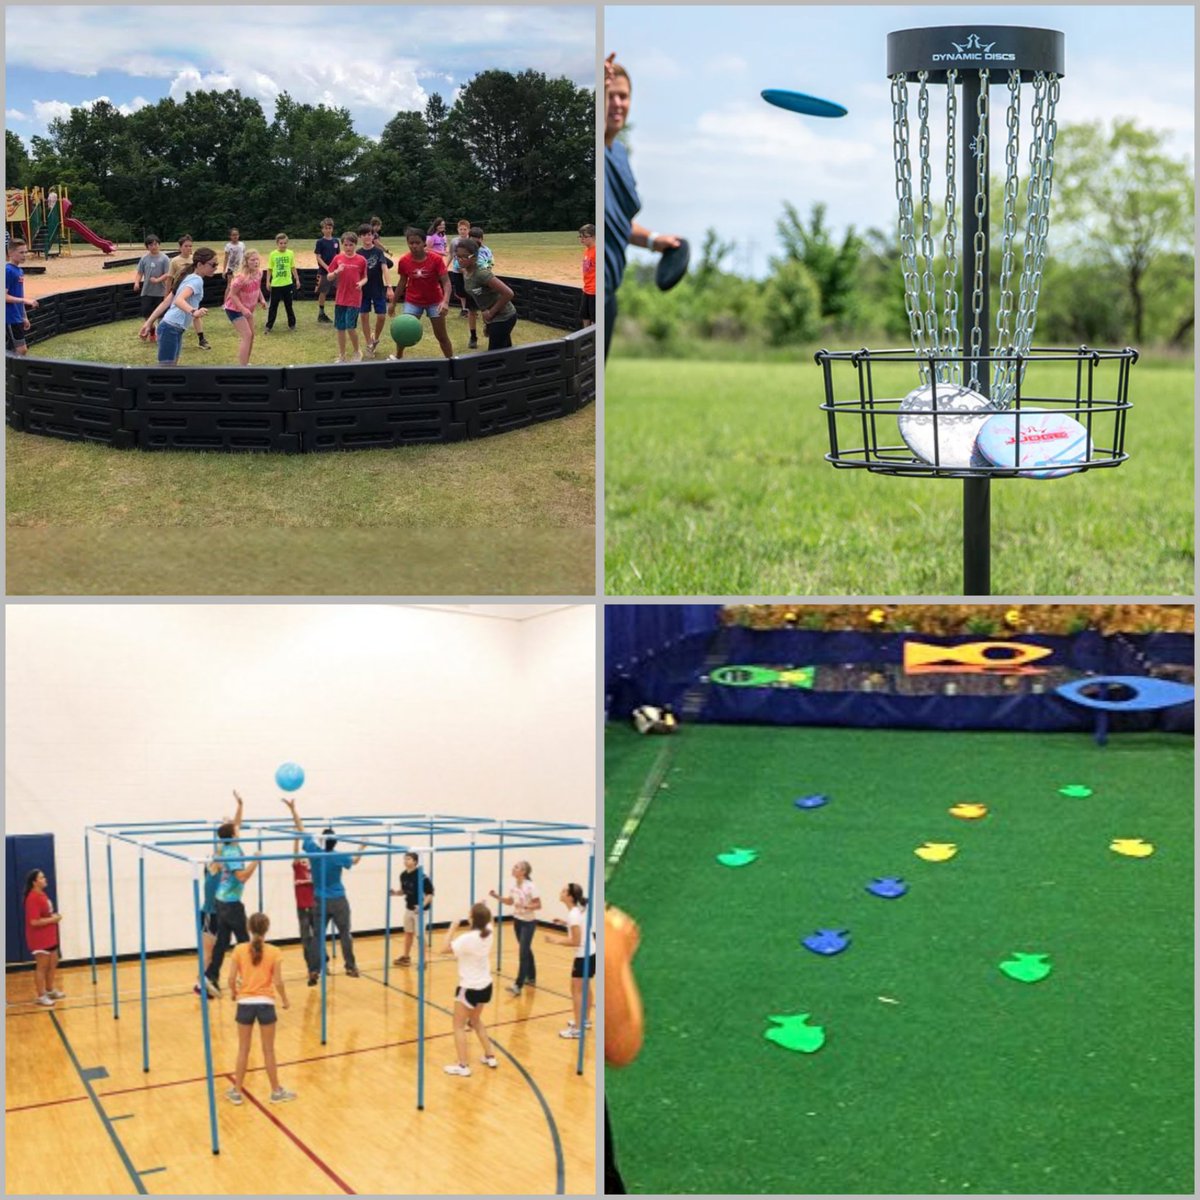 Come try your skills at some of the students' favorite @HumbleISD physical education activities - 9 Square in the Air, MEGA GaGa Ball Pit, Disc Golf and Backyard Bass Fishing 🎣🥏🏃🏼‍♀️🏈 TOMORROW, Thursday 5/2/24 6-8pm at the Summer Family Night!! See you then at Lakeland Elementary